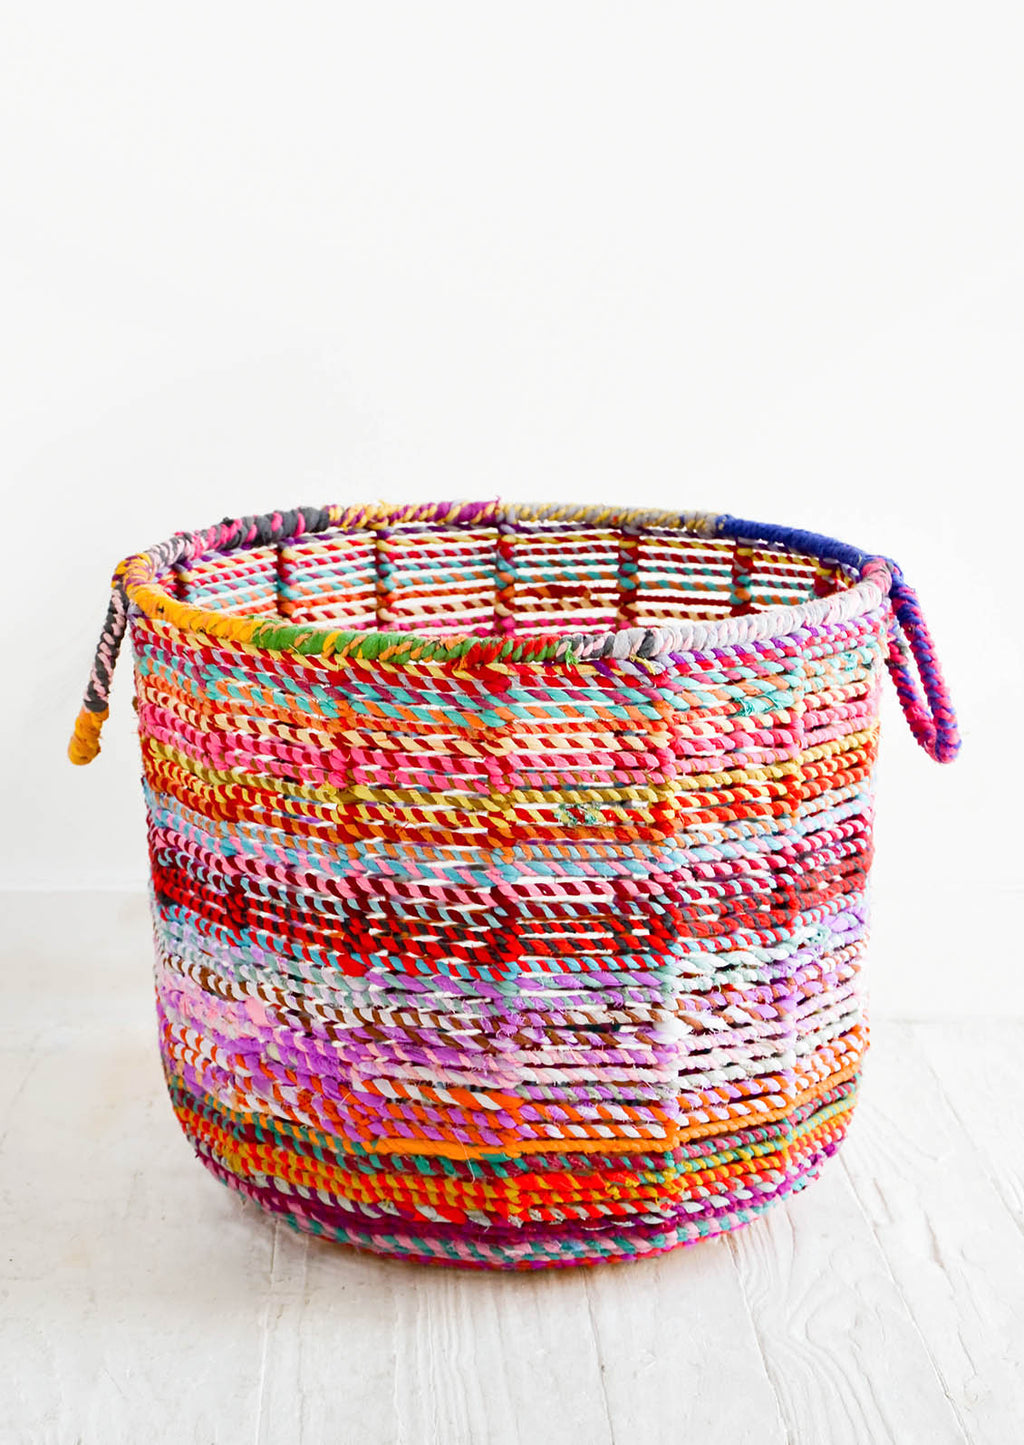 2: Round, circular storage bin made from colorful recycled fabrics woven together, featuring round handles at top.